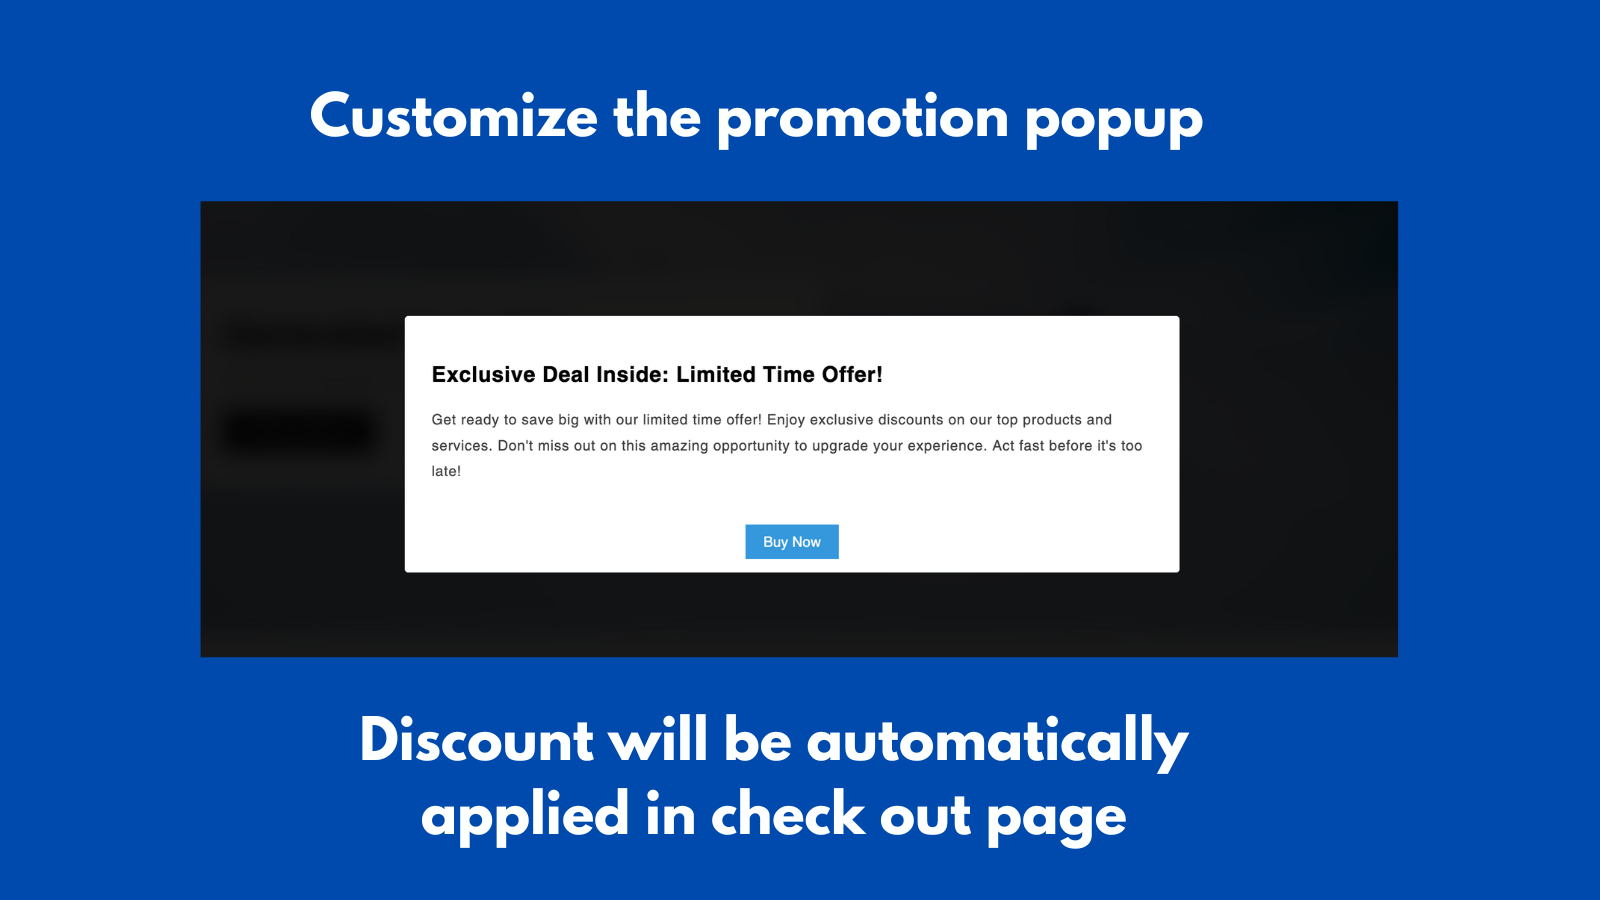 Customize the promotion popup with custom message, CTA